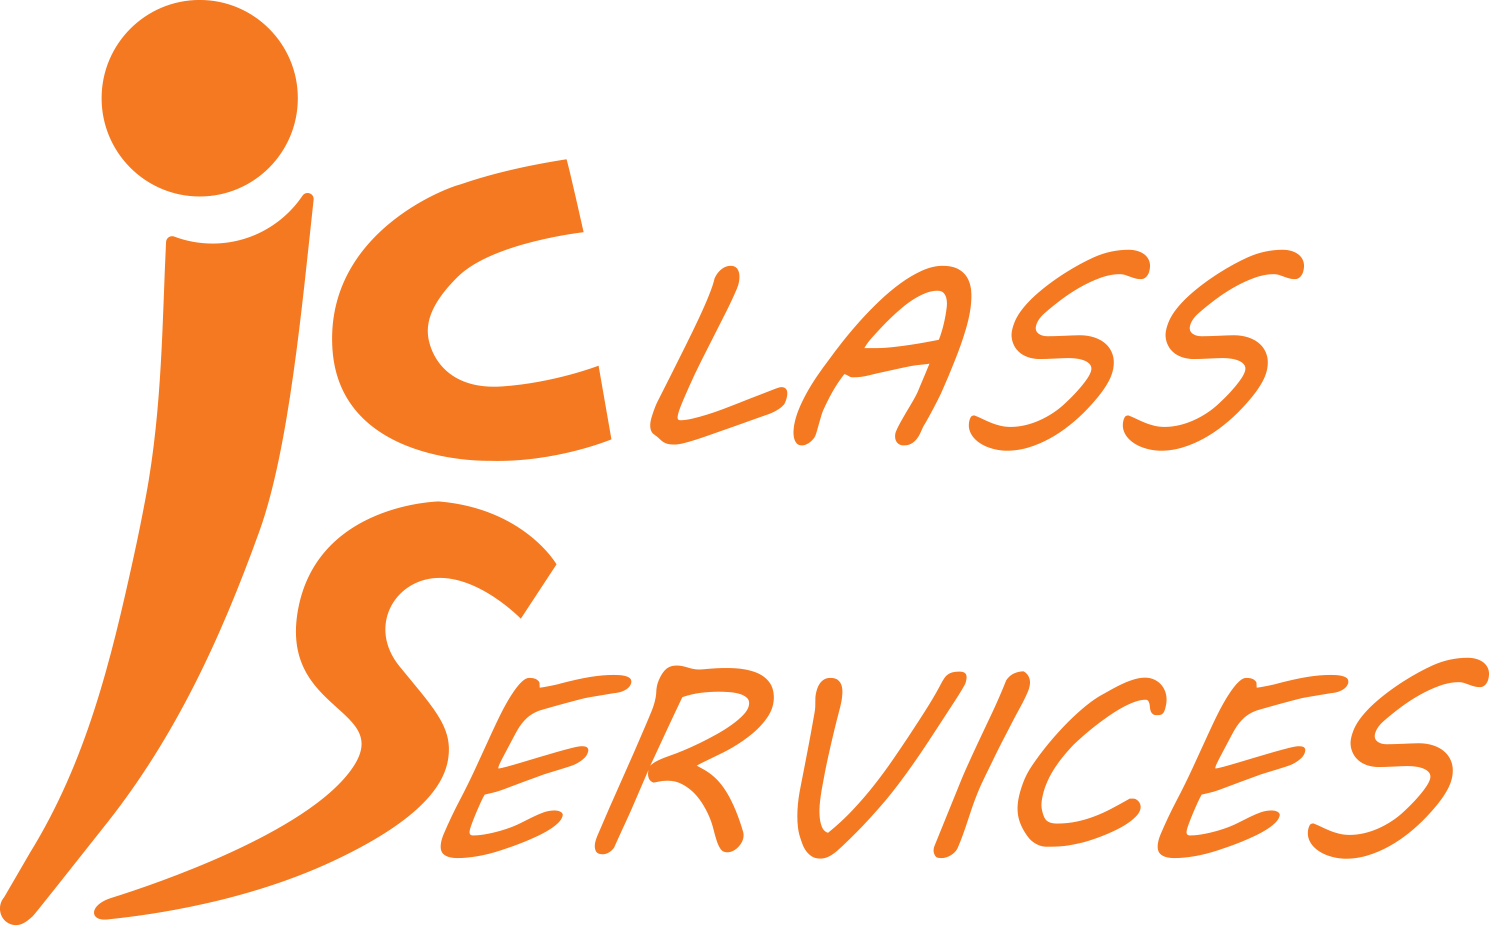 i class services